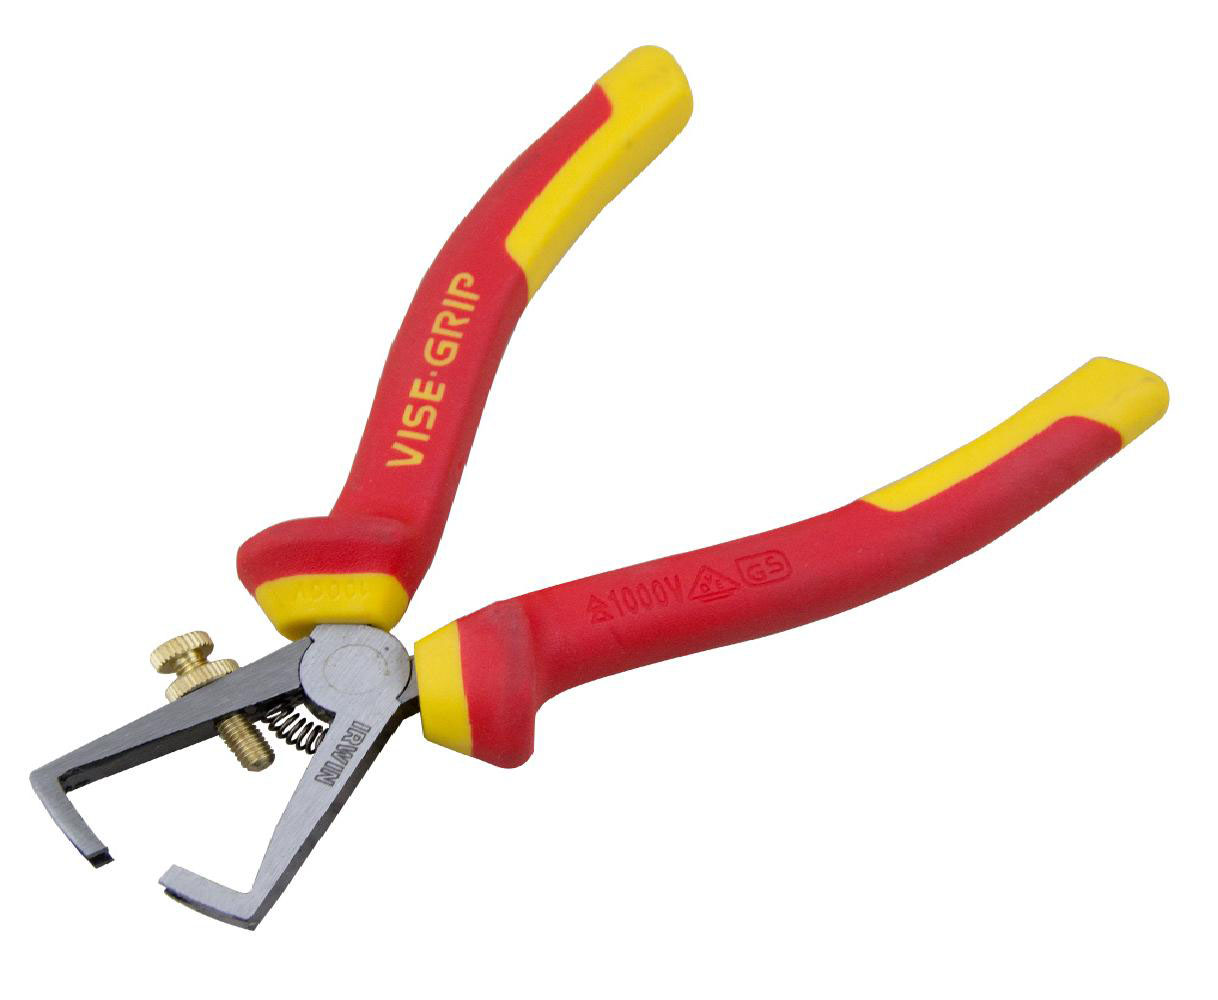 IRWIN VISE-GRIP VDE 1000V INSULATED WIRE STRIPPING PLIERS 10505871 